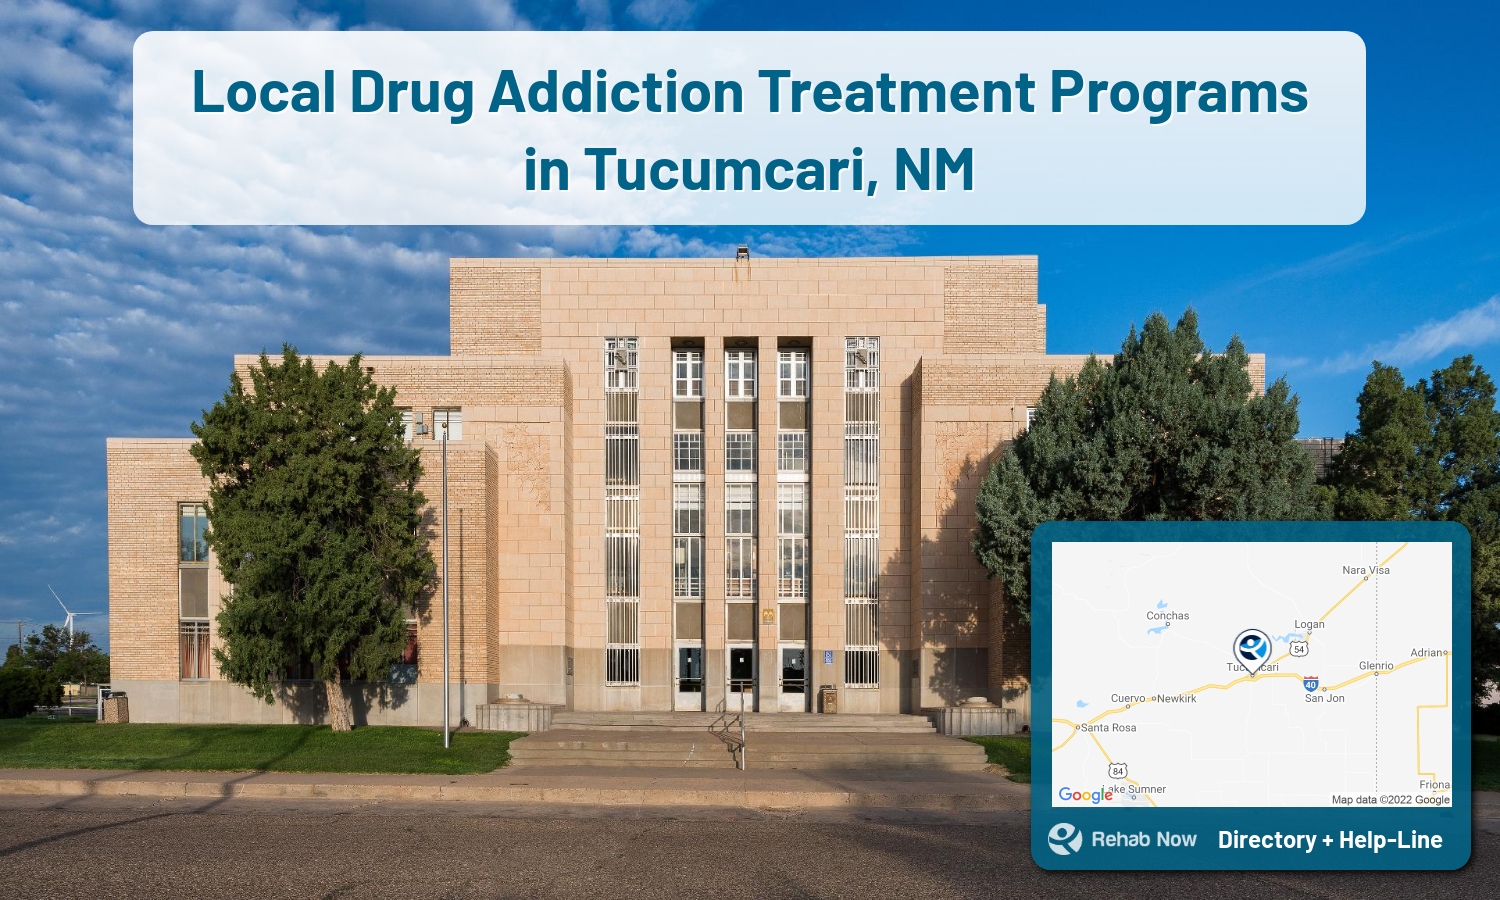 Tucumcari, NM Treatment Centers. Find drug rehab in Tucumcari, New Mexico, or detox and treatment programs. Get the right help now!